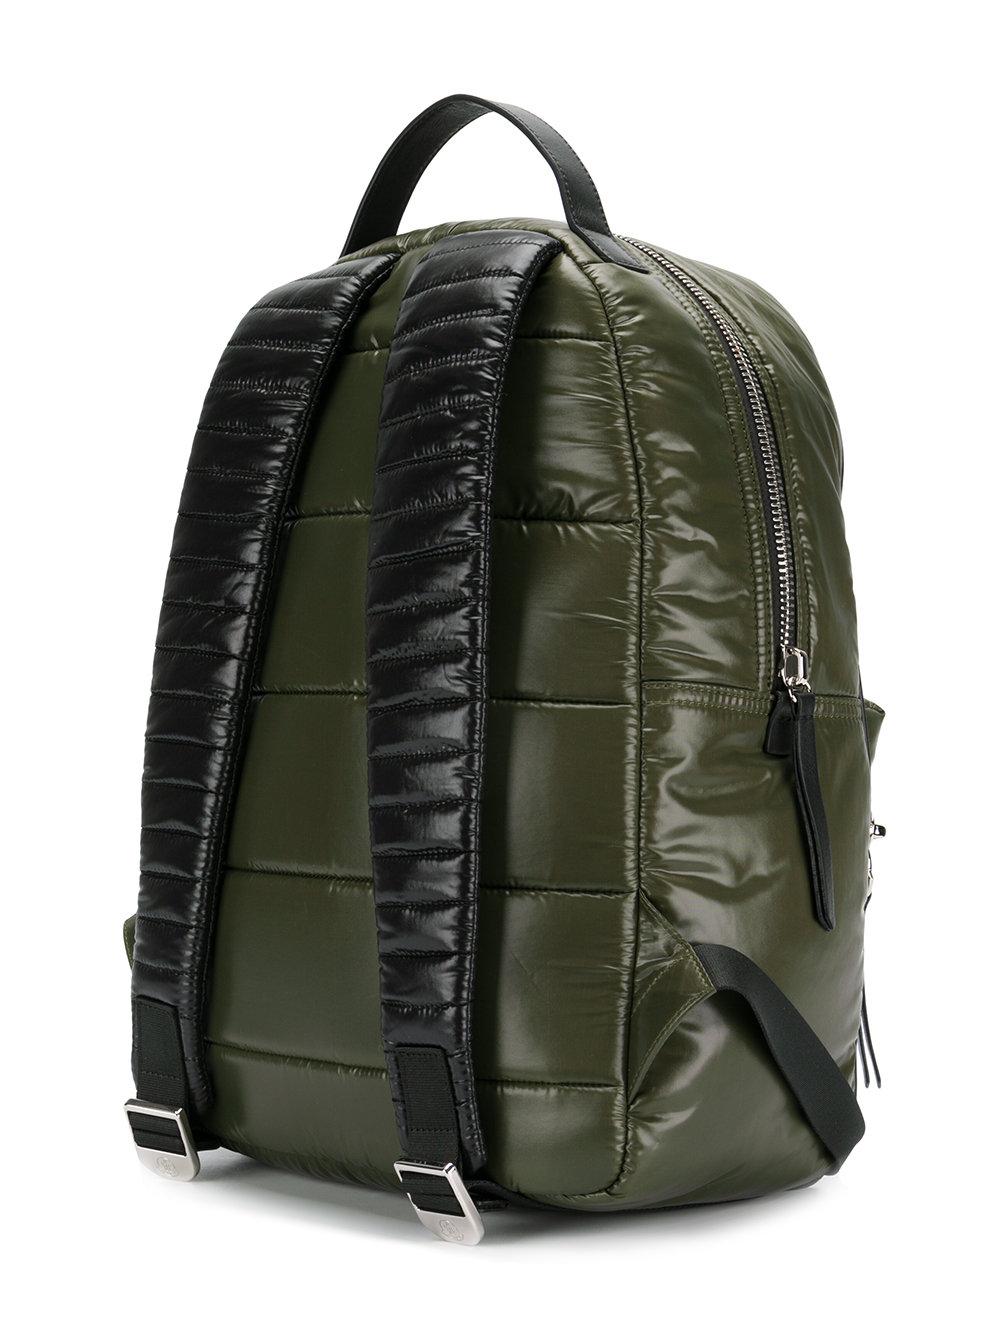 Moncler Leather New George Backpack in Green for Men - Lyst